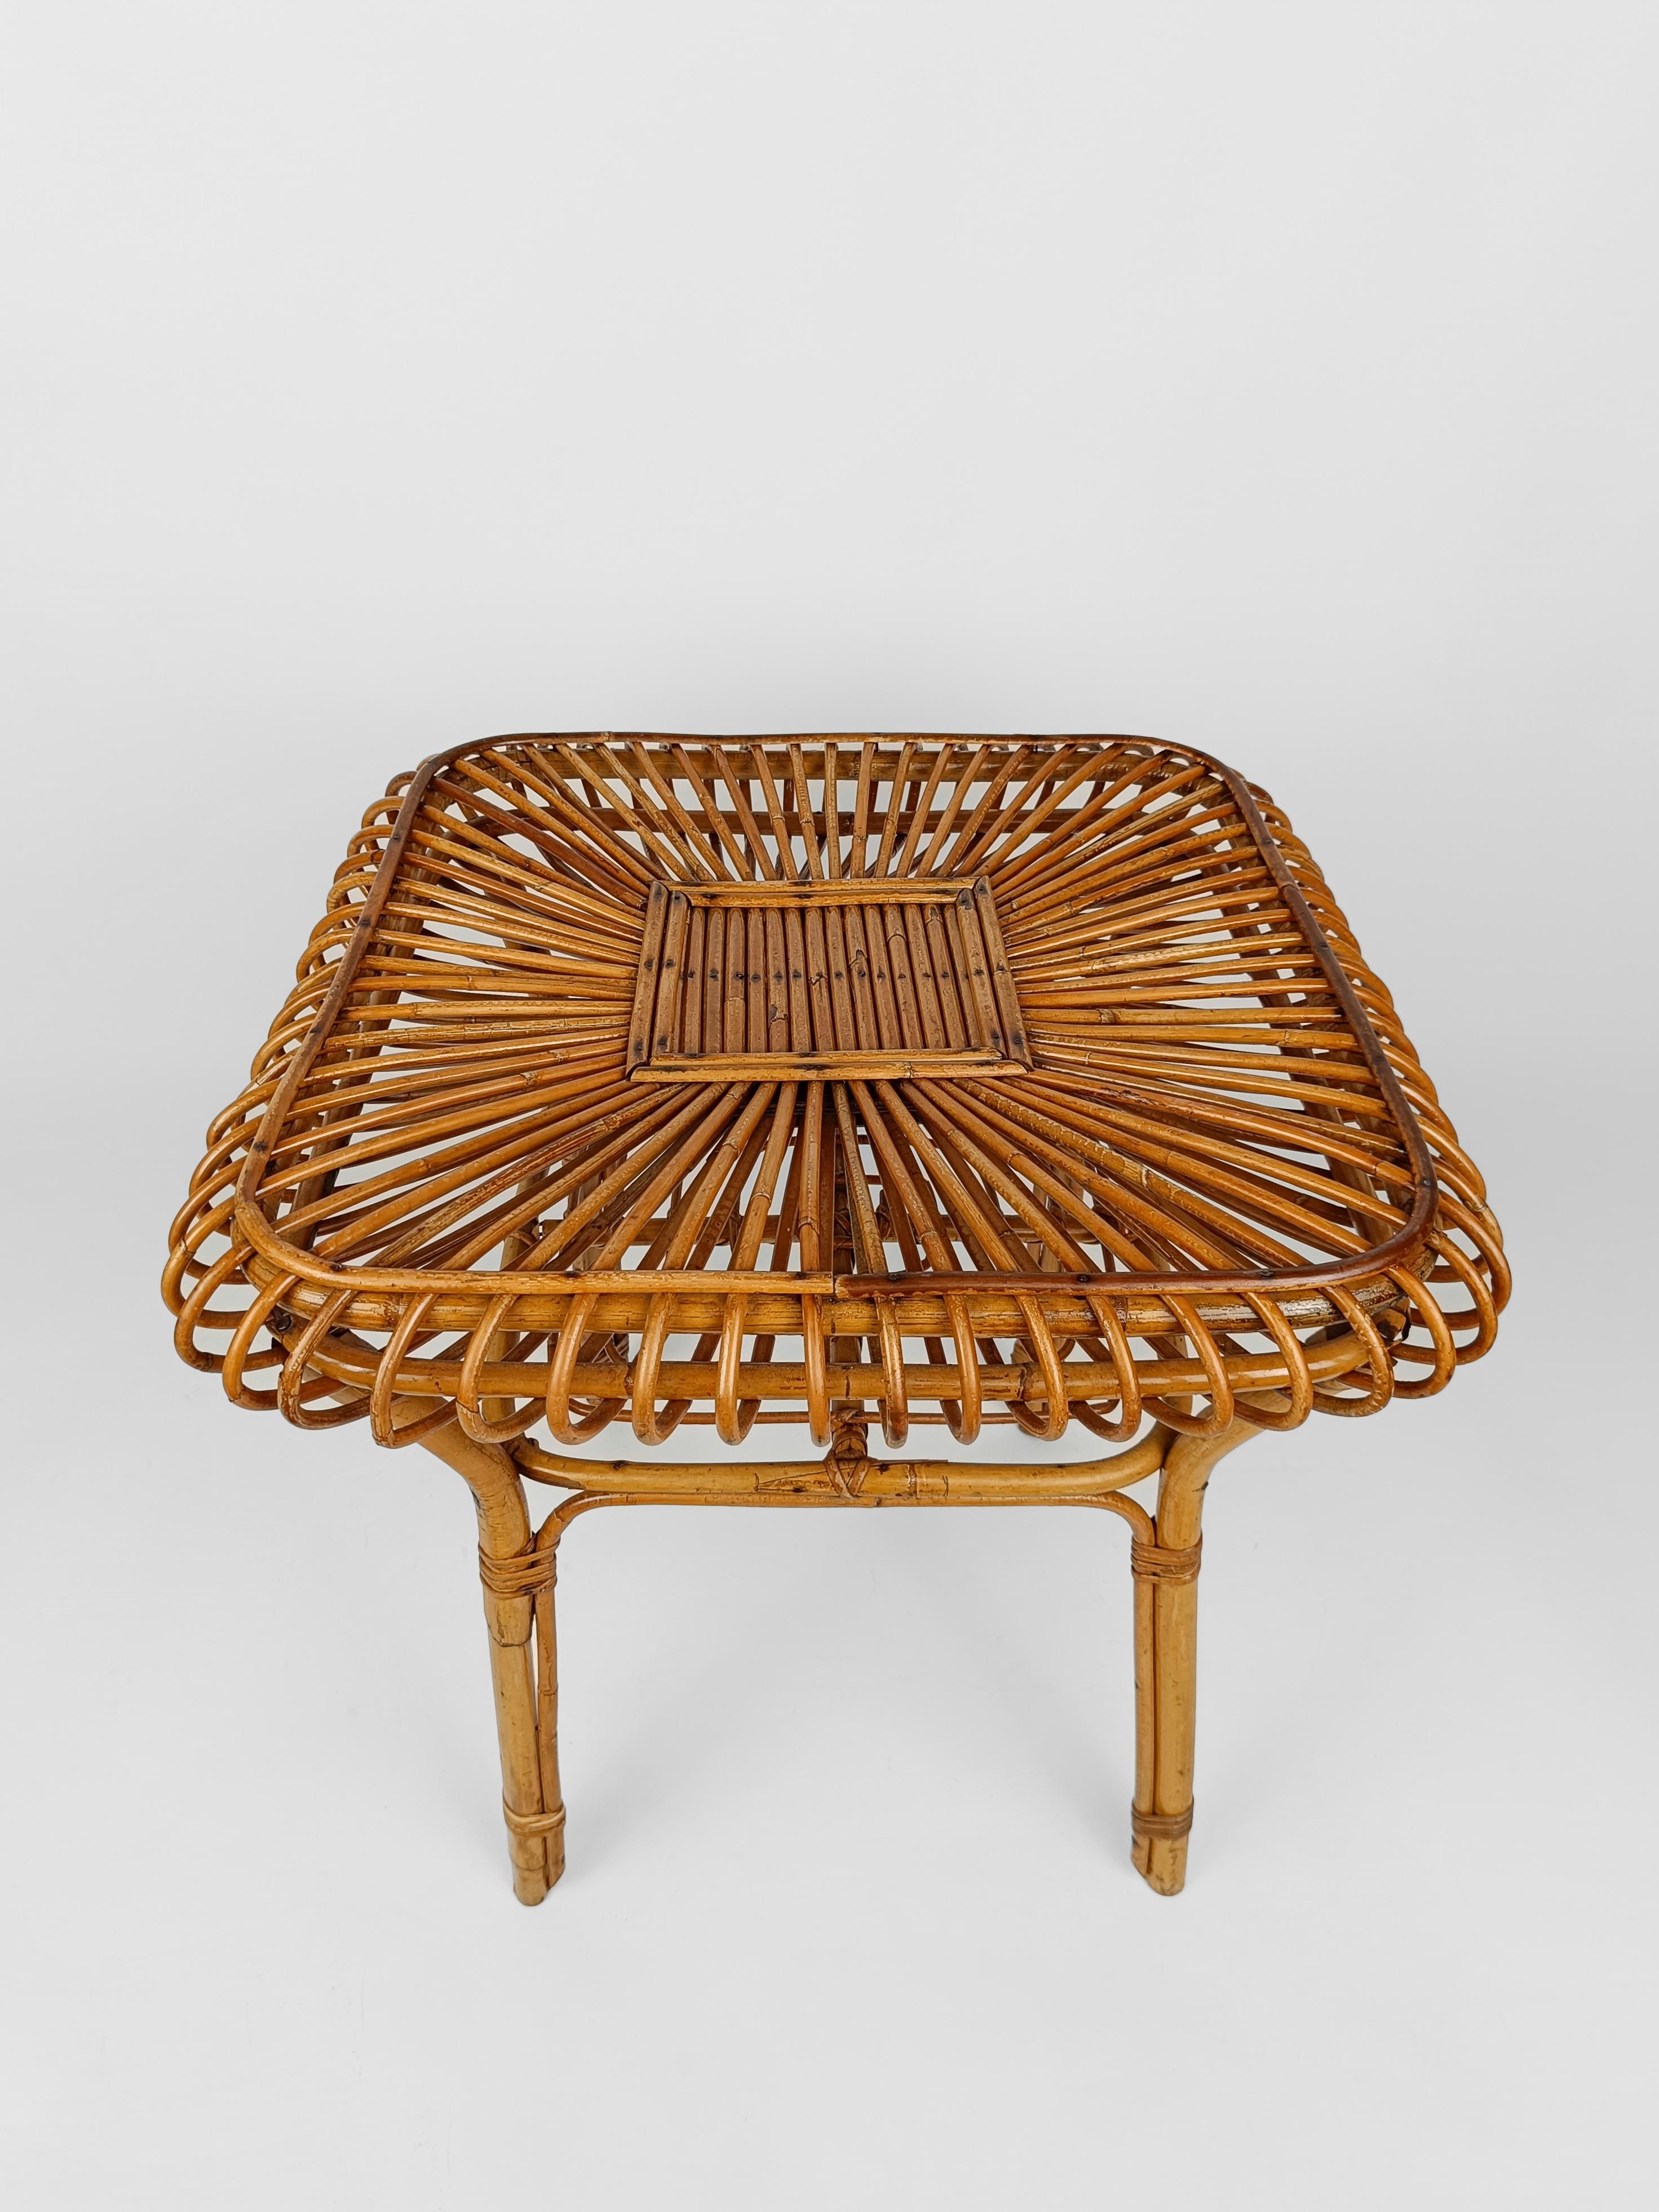 Vintage Cane and Rattan Set of 2 shell-shaped Armchairs with Coffe Table, 1960s For Sale 12